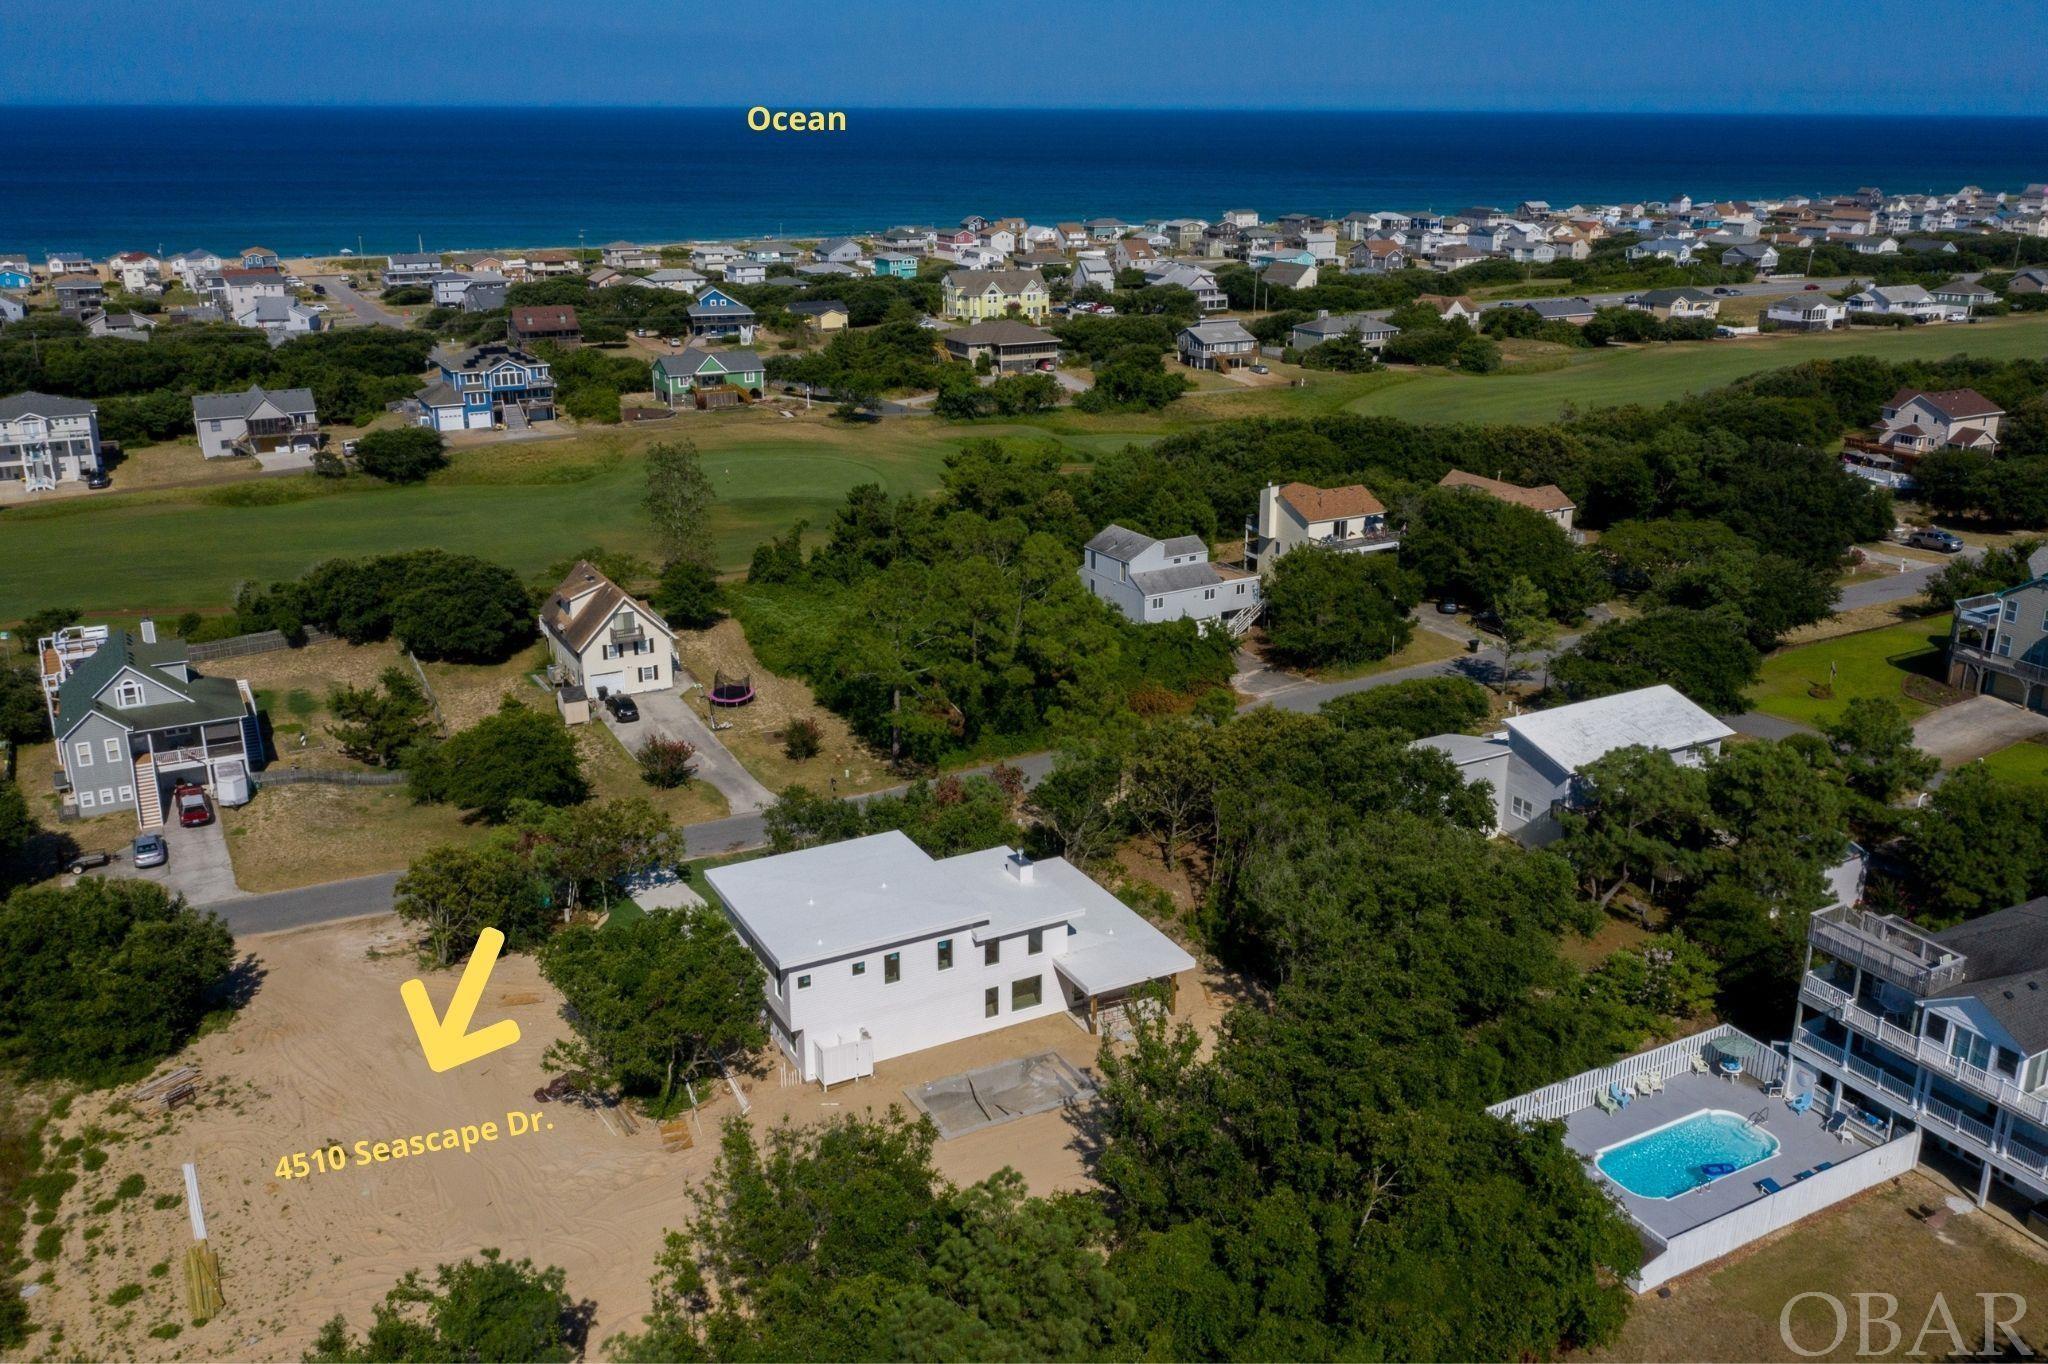 This spacious lot on the golf course in Sea Scape is cleared and ready for your dream home!  Whether your goal is to build your primary "forever" home, create an oasis to escape to with loved ones, or own an income-producing vacation rental, this location will fit your needs perfectly.  This lot has a high elevation with opportunities for enjoying horizon ocean views from the upper levels of your home!  Neighborhood intersects the bypass at a stoplight with crosswalk for easy access to the beach, as well as close proximity to golf and dining--park the car and ride your bike or golf cart everywhere.  This lot is totally turn-key--all that's missing is you!